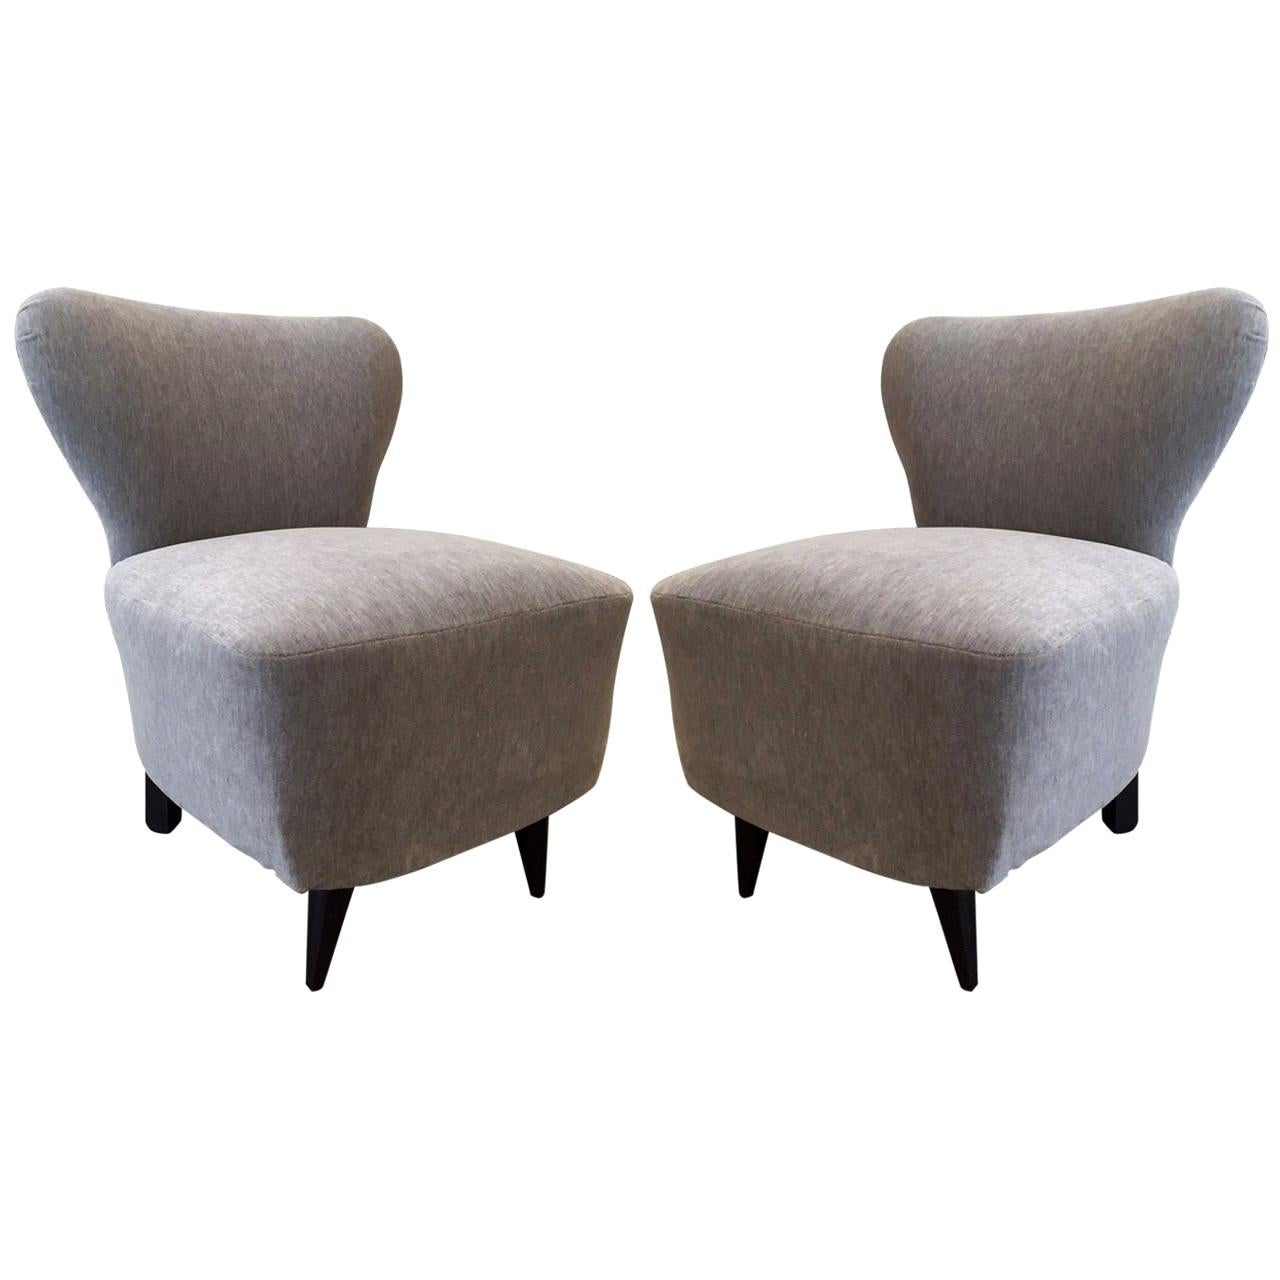 Pair of 1930s French Slipper Chairs Style of Jacques Adnet For Sale